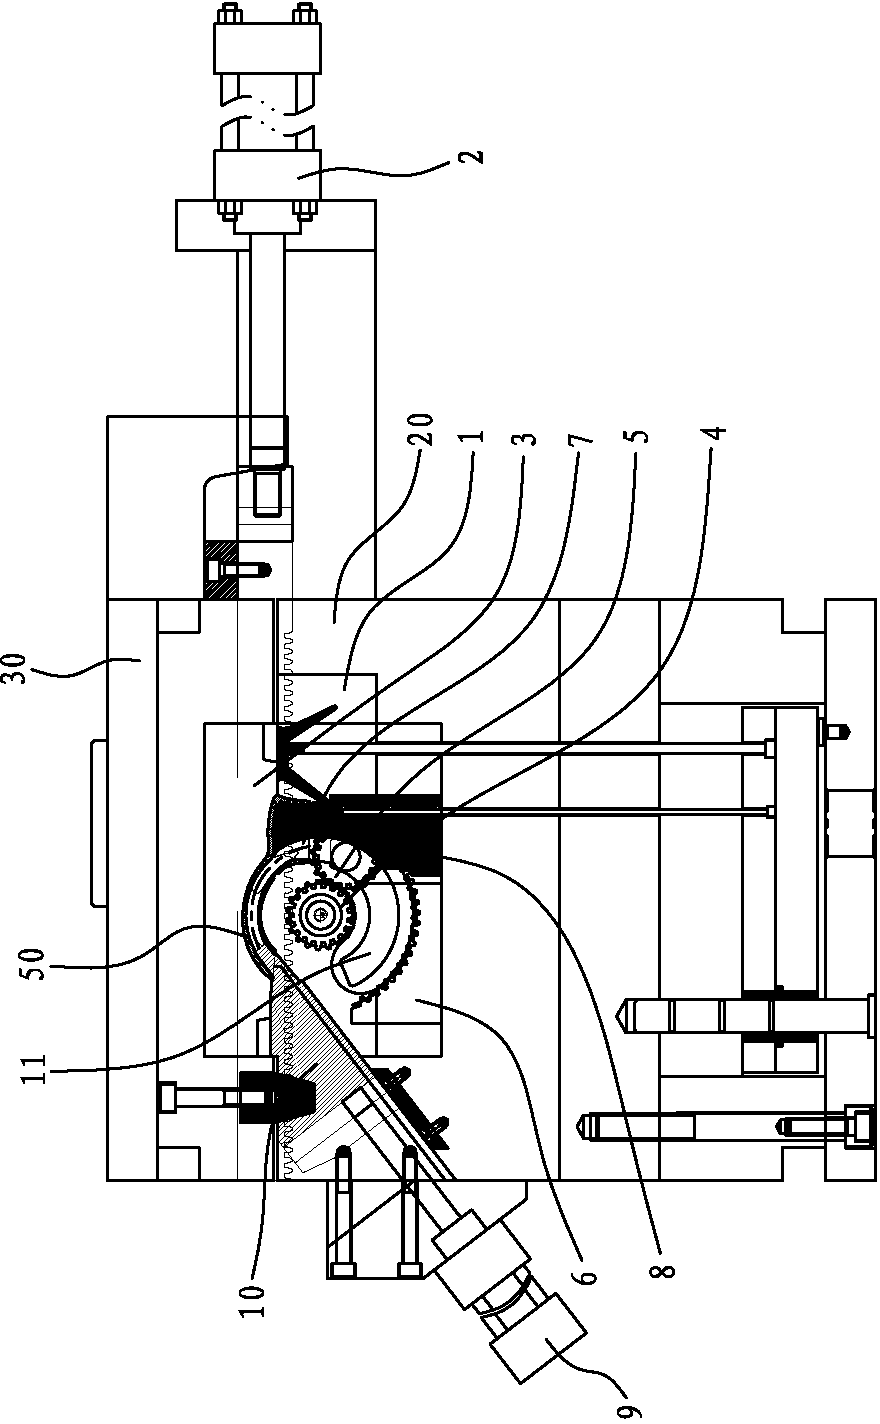 Arc core-pulling device for die